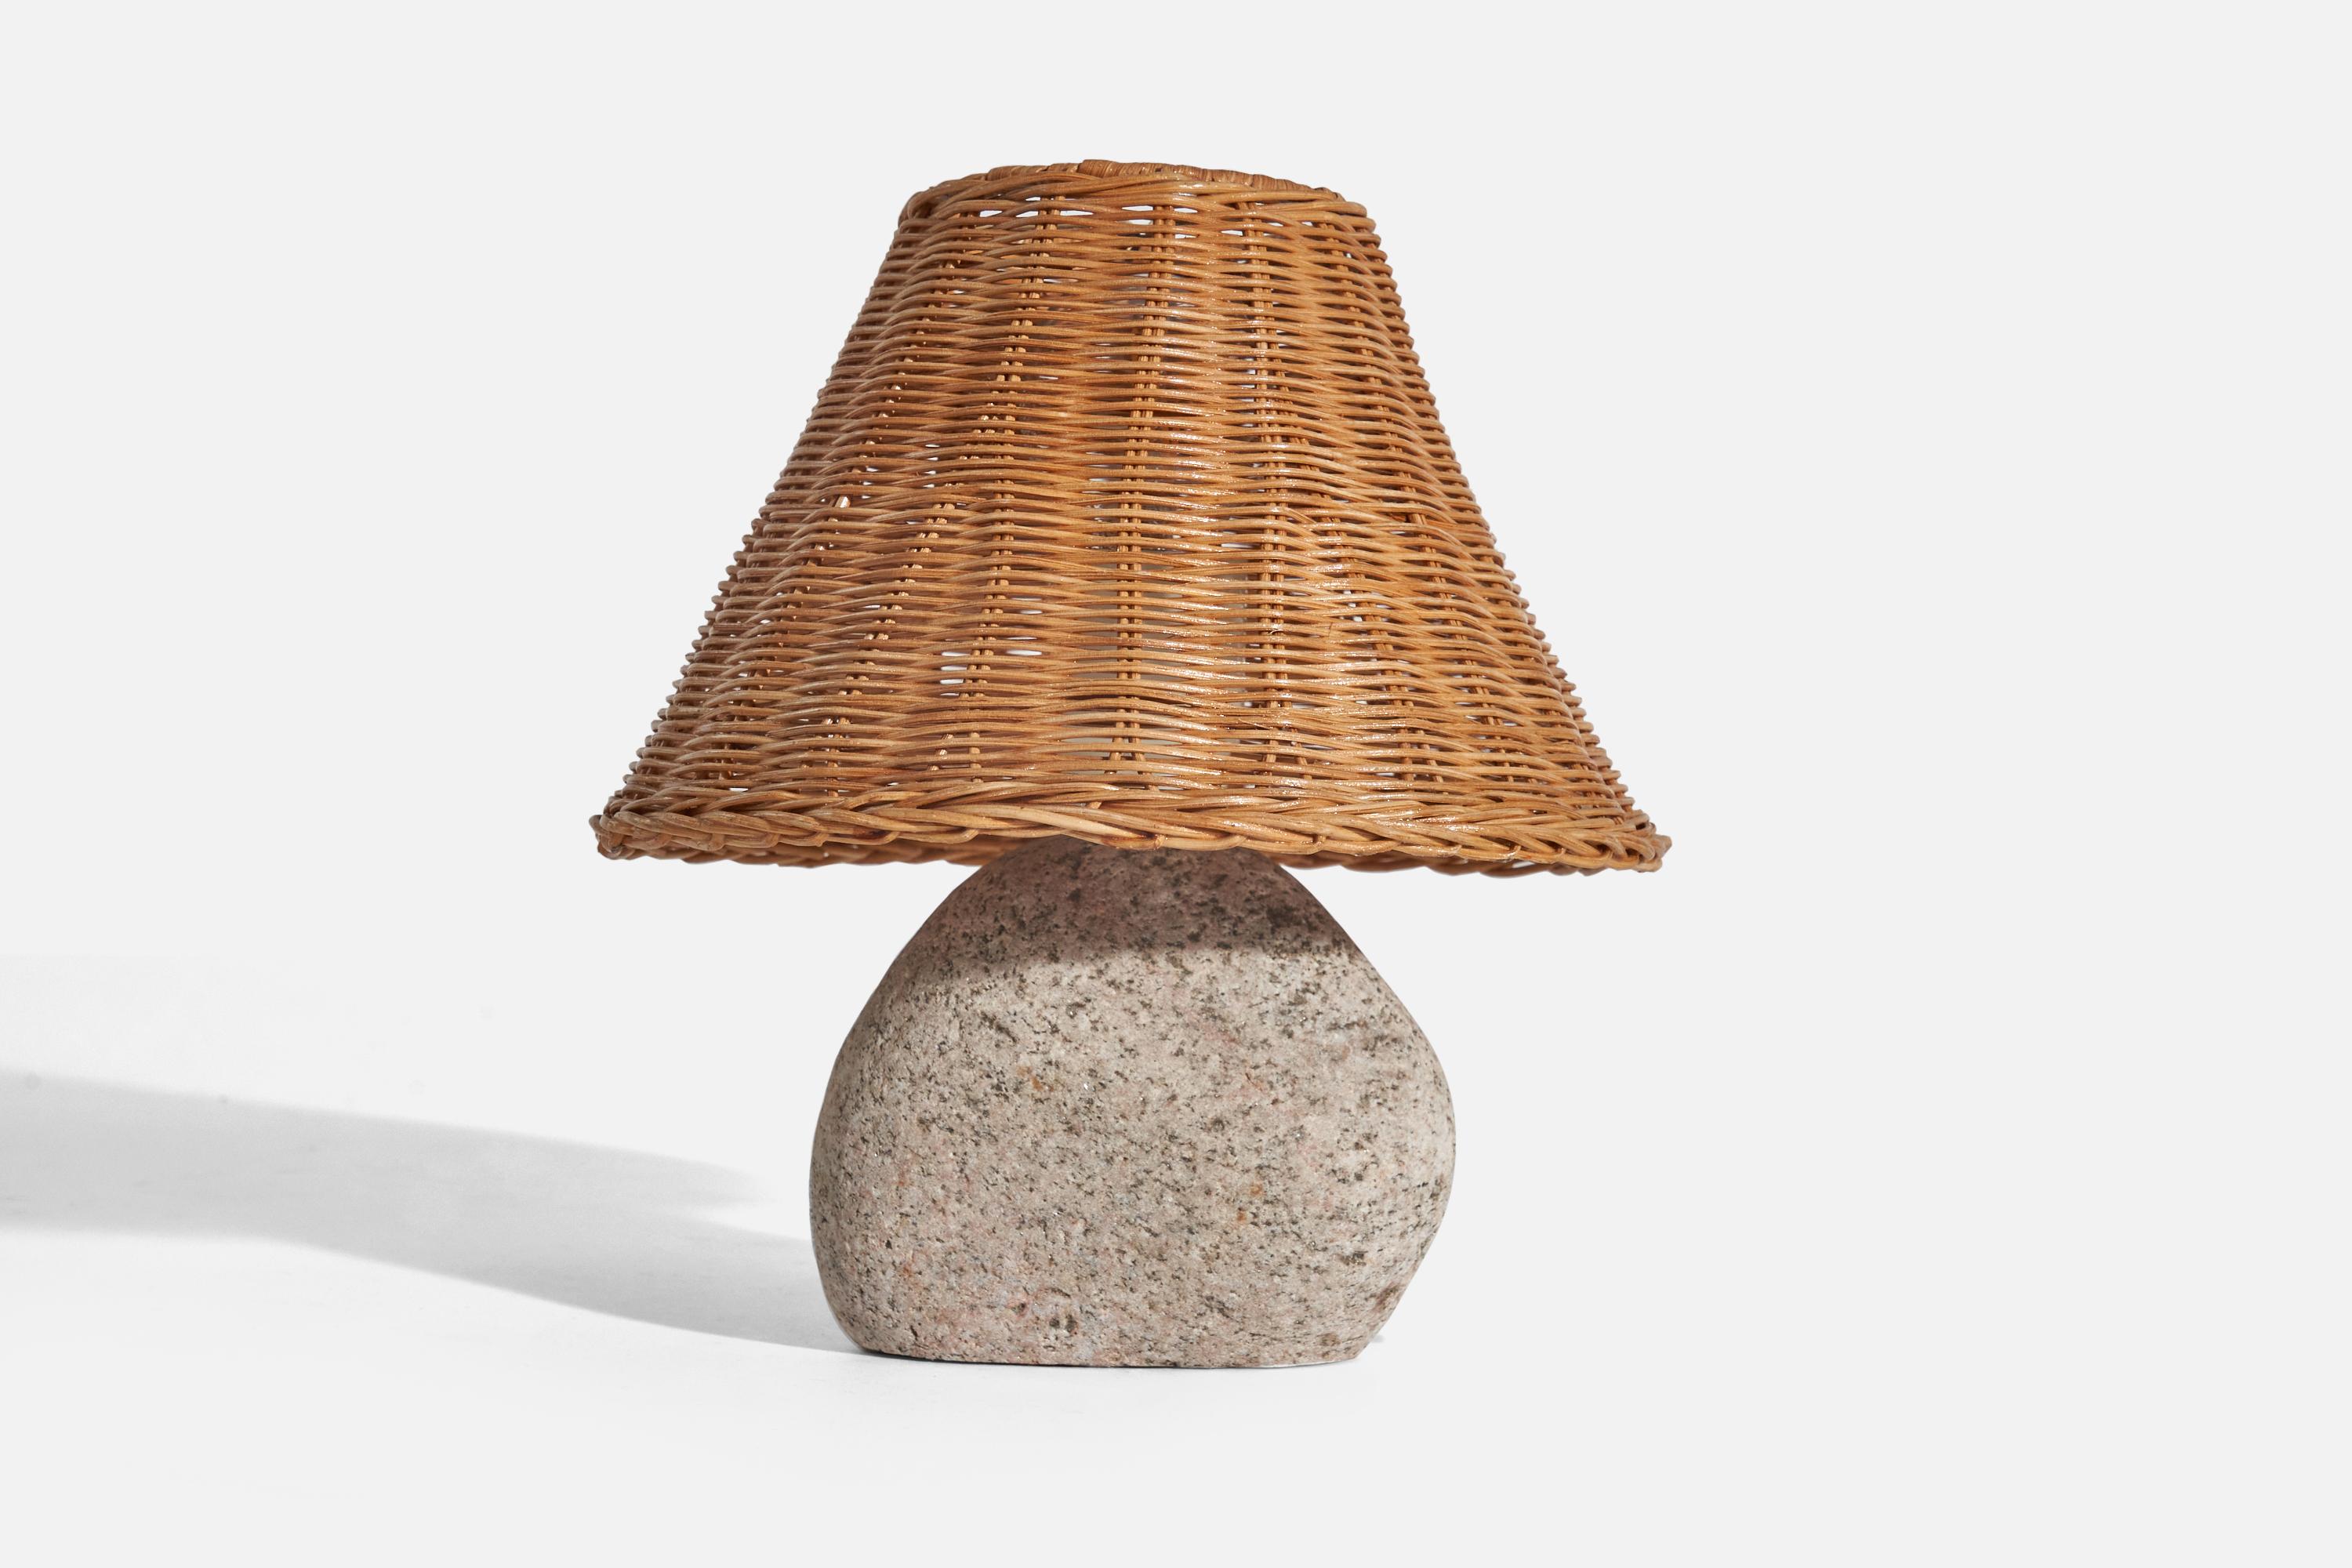 A stone table lamp designed and produced in Sweden, c. 1970s.

Sold with rattan Lampshade(s)
Dimensions of lamp (inches) : 11.87 x 7.06 x 4.43 (height x width x depth)
Dimensions of shade (inches) : 8.25 x 10.37 x 7.12 (top diameter x bottom